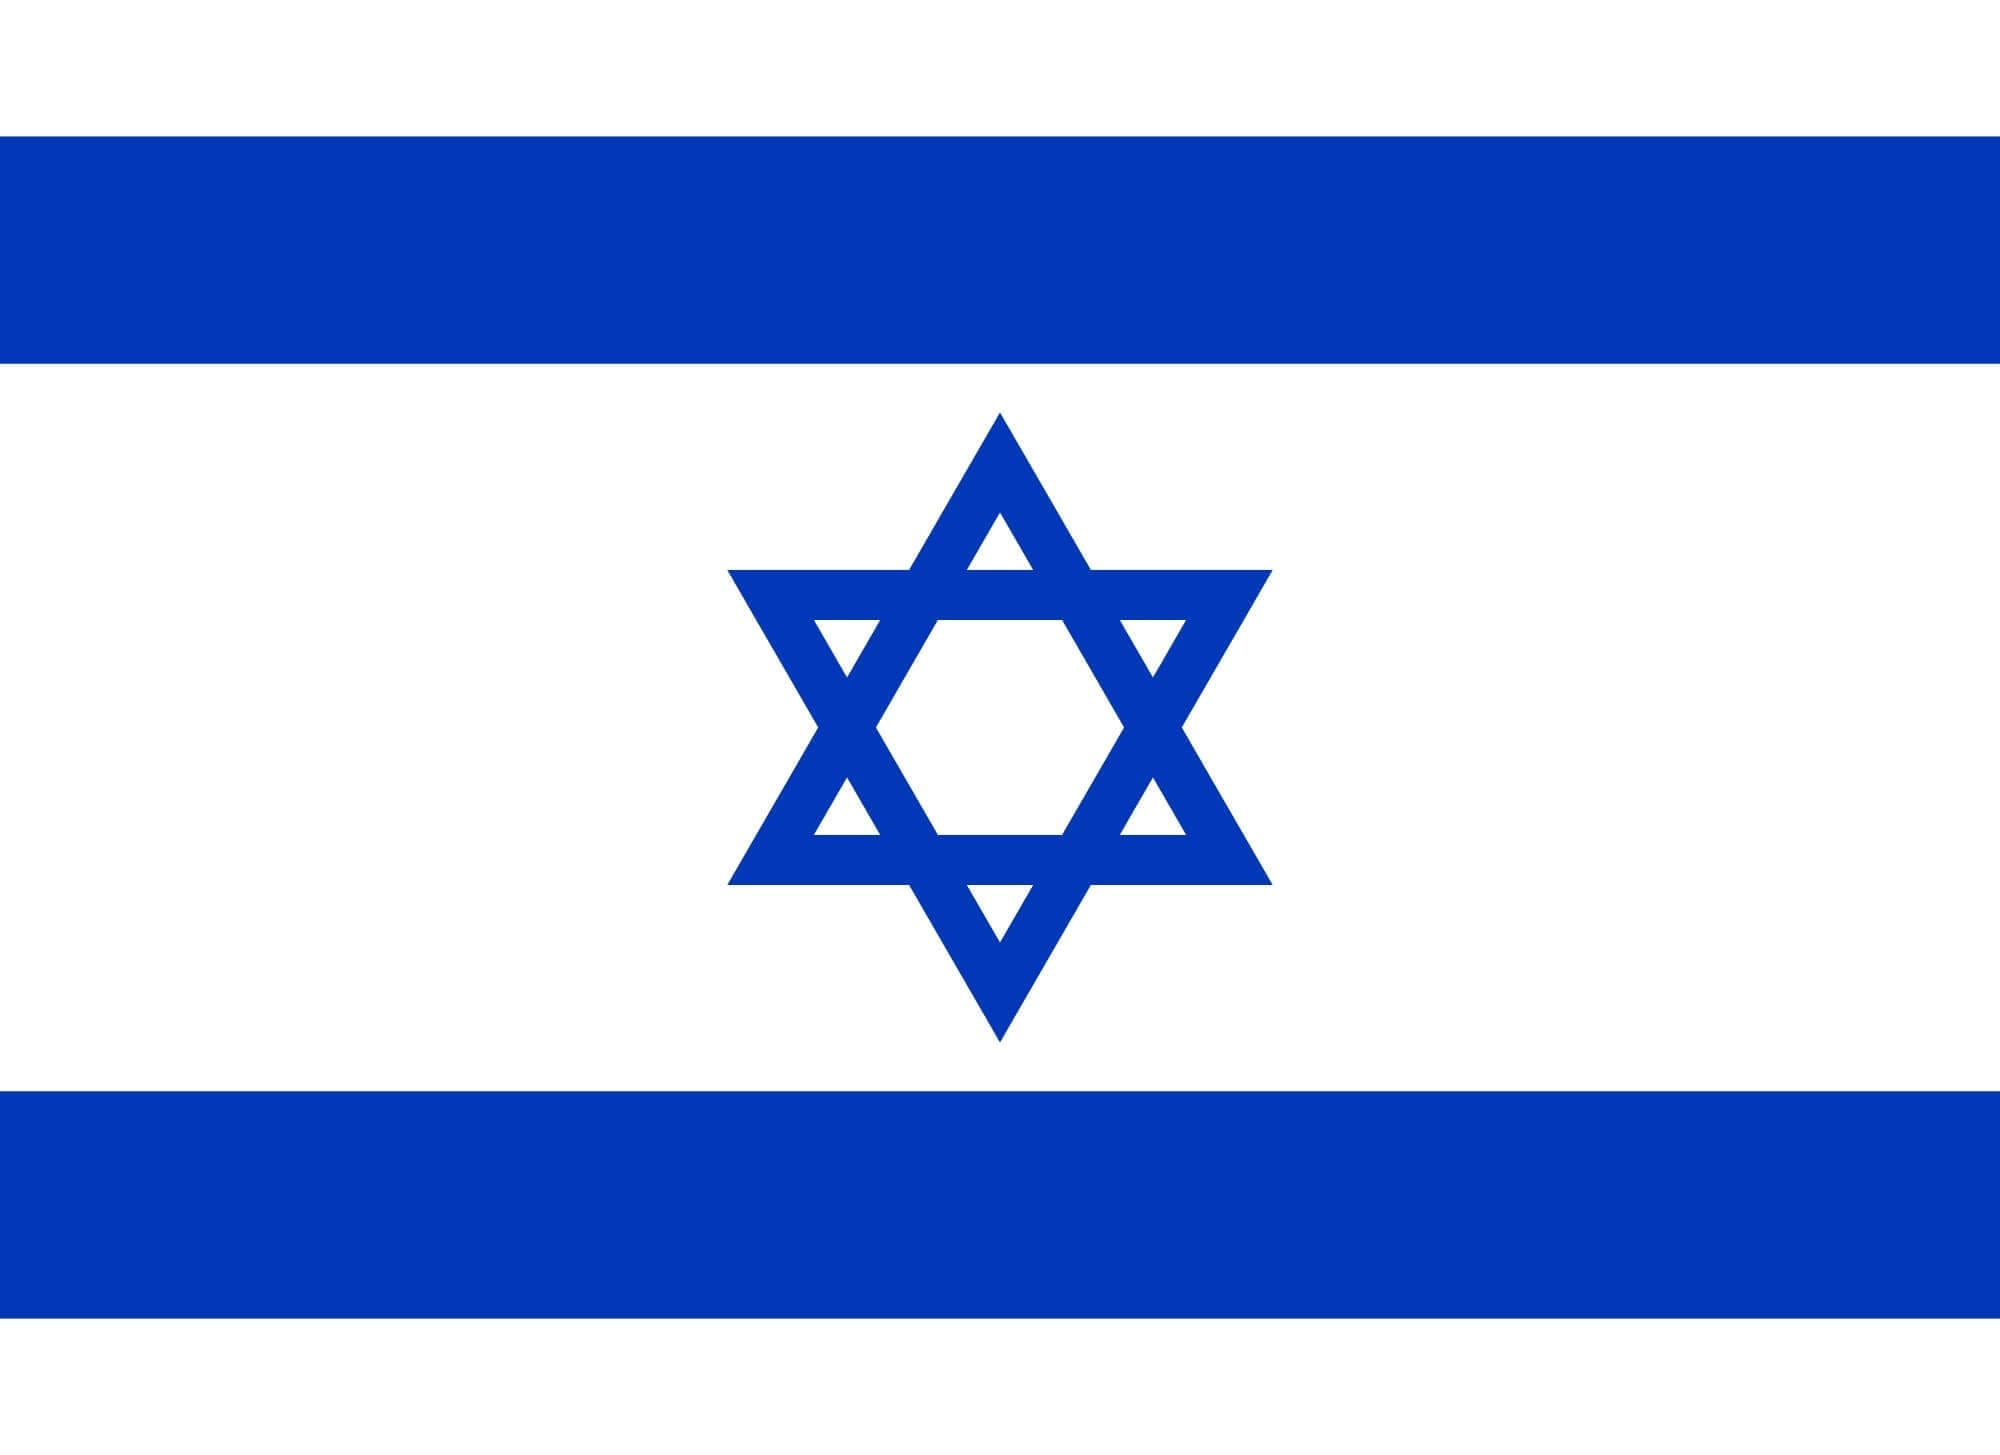 Israel Independence Day and the Halakhah